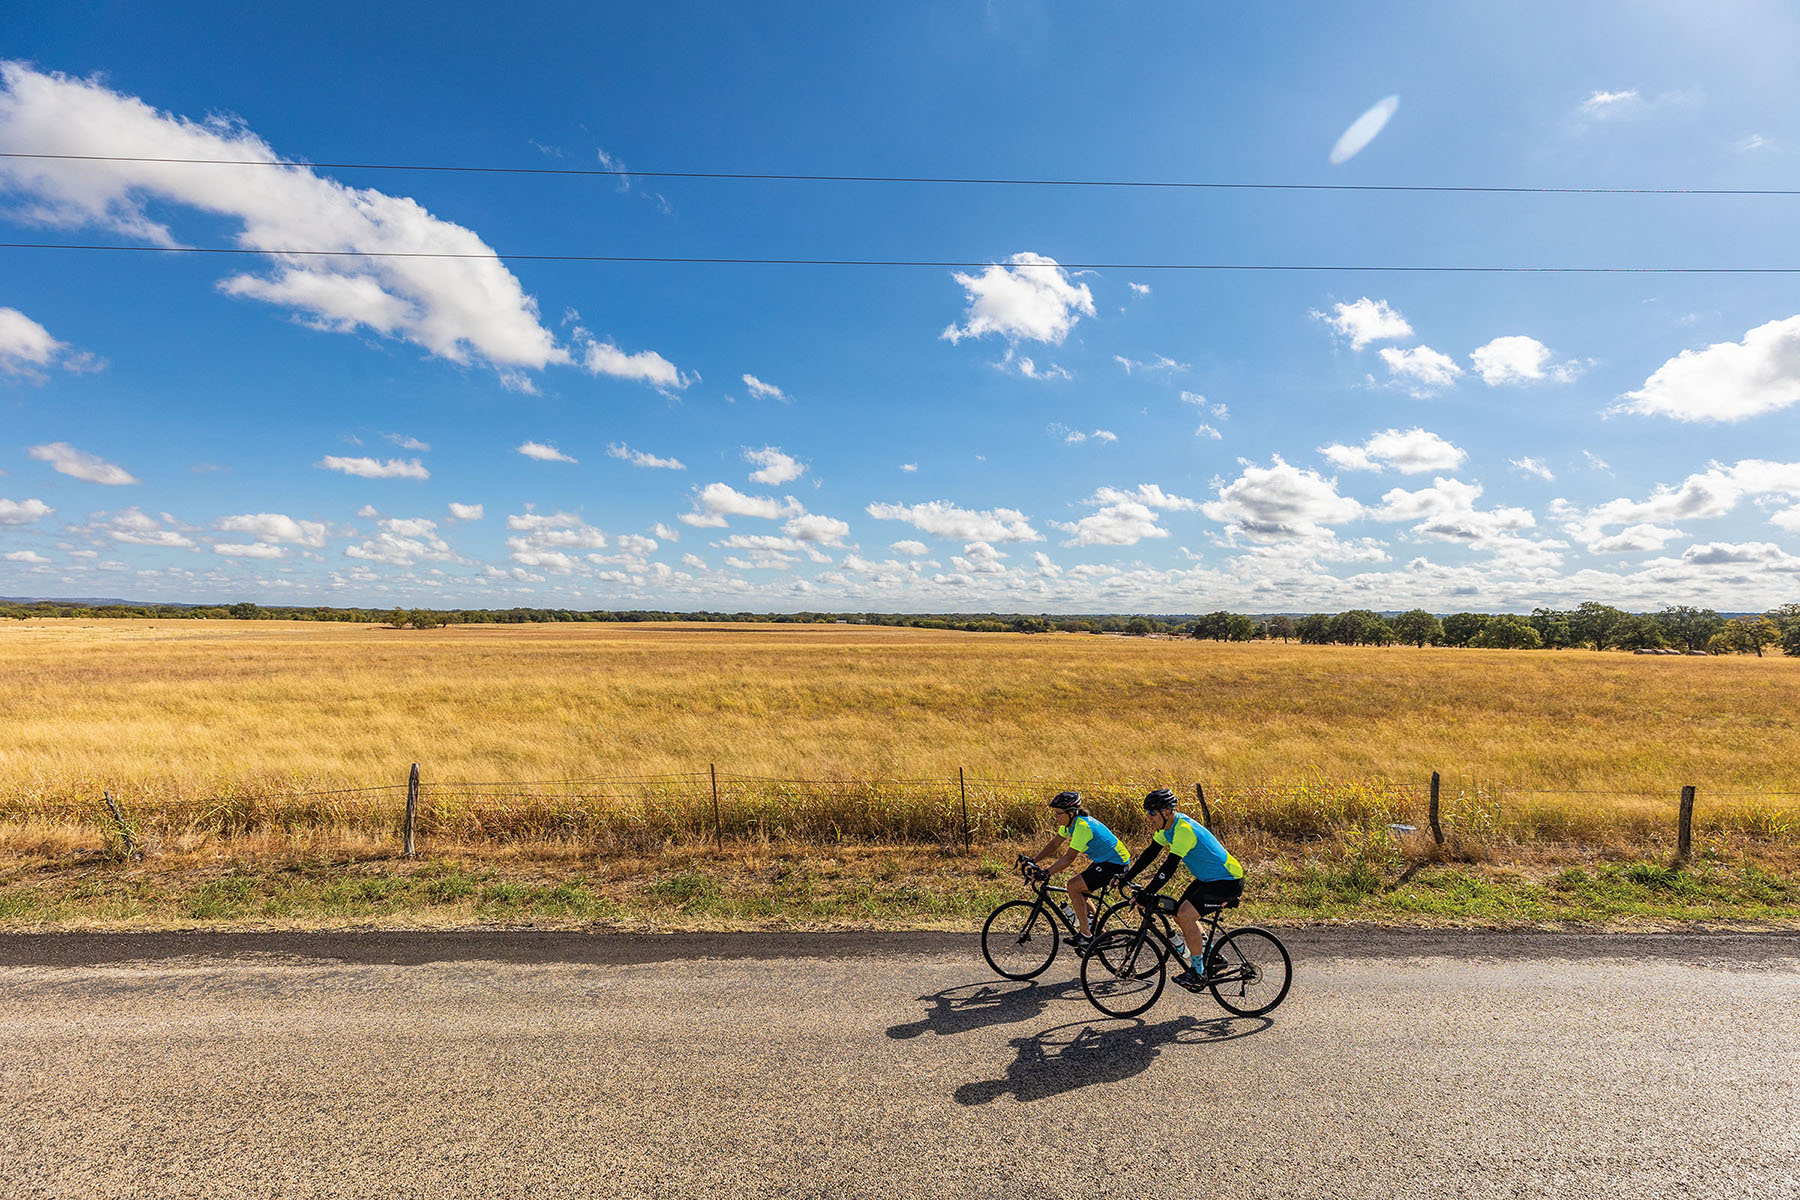 Two bicyclists wearing blue and green shirts ride in front of a large field under blue sky